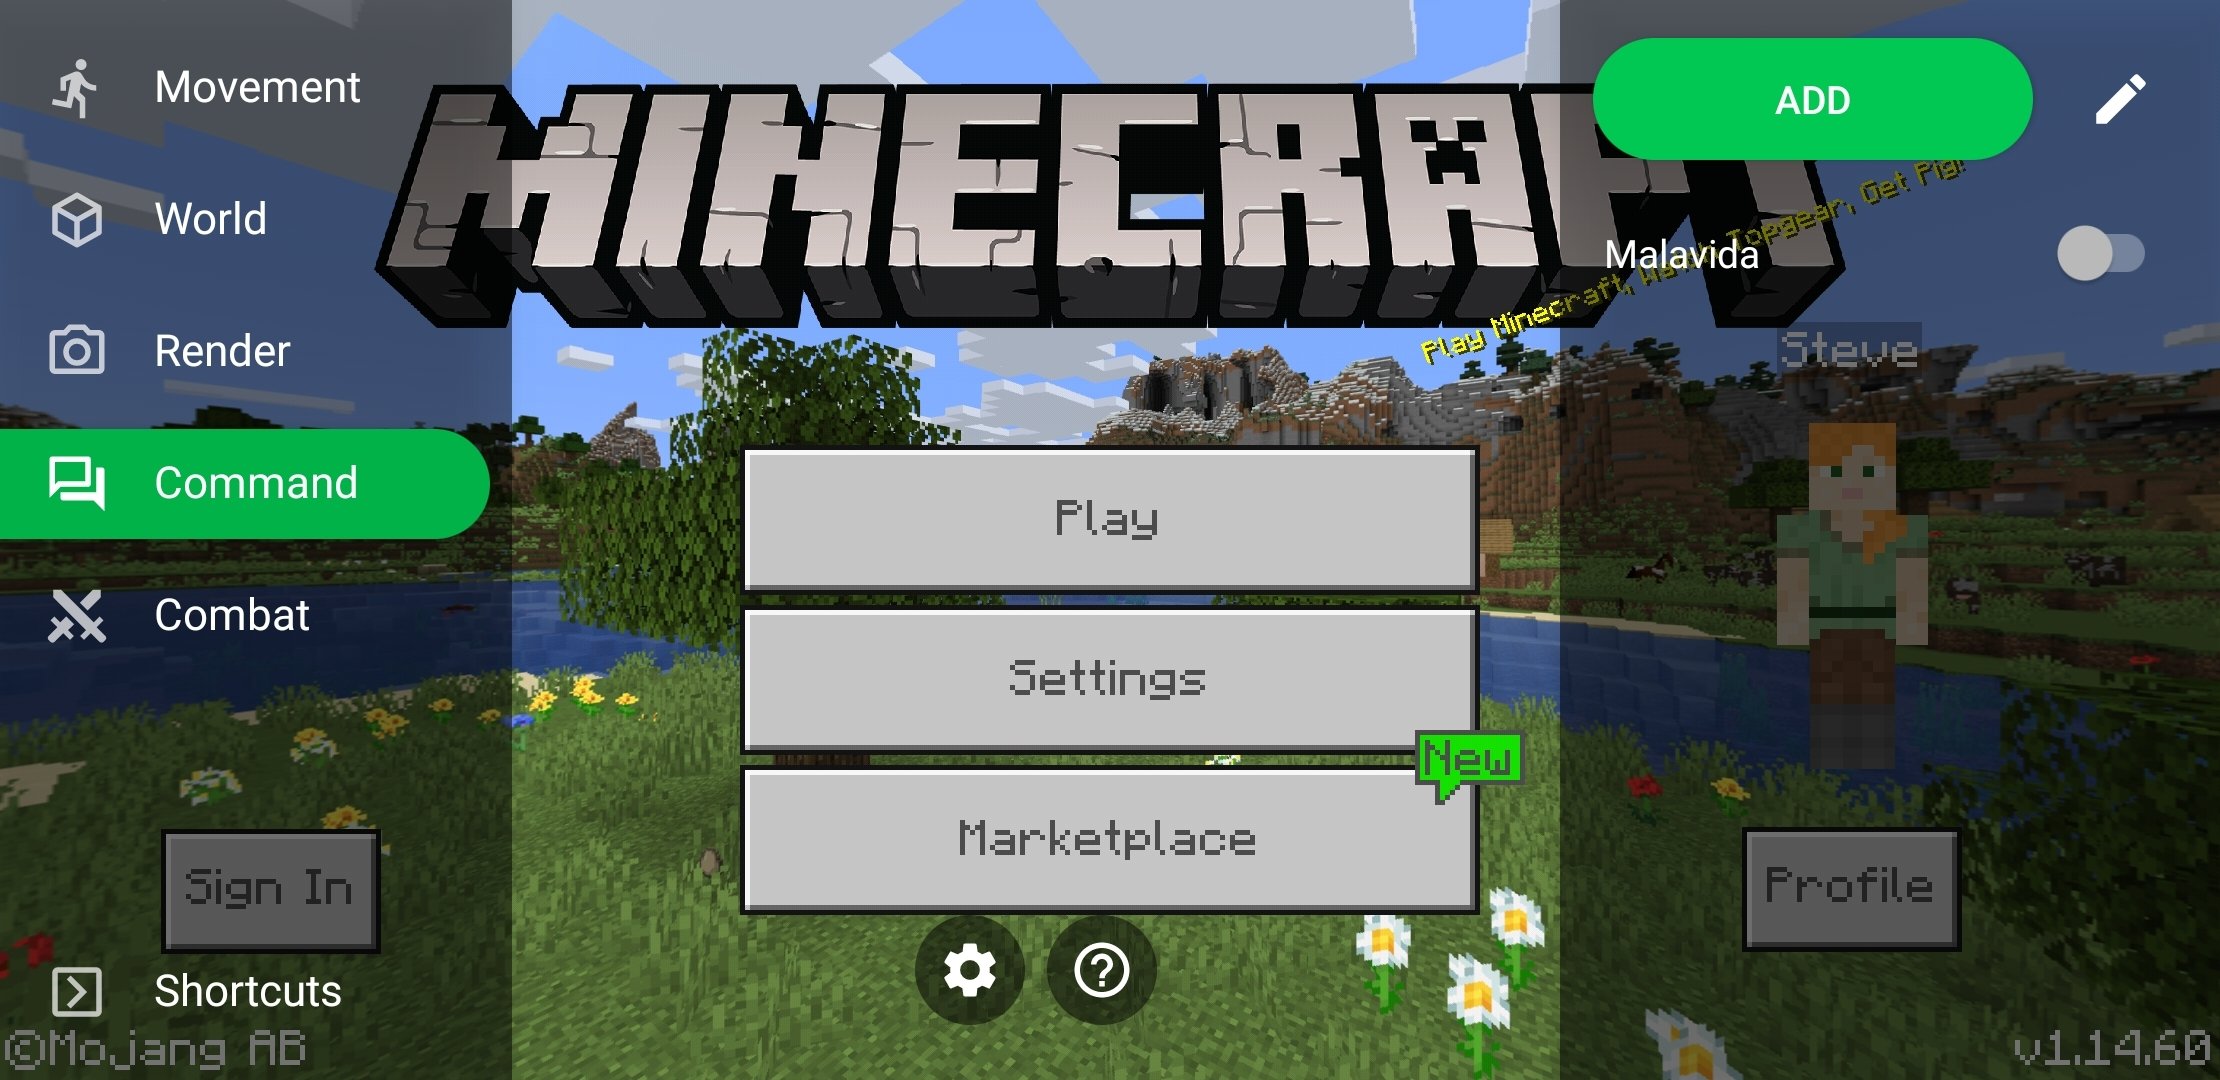 Minecraft 1.20 APK download link for Android devices